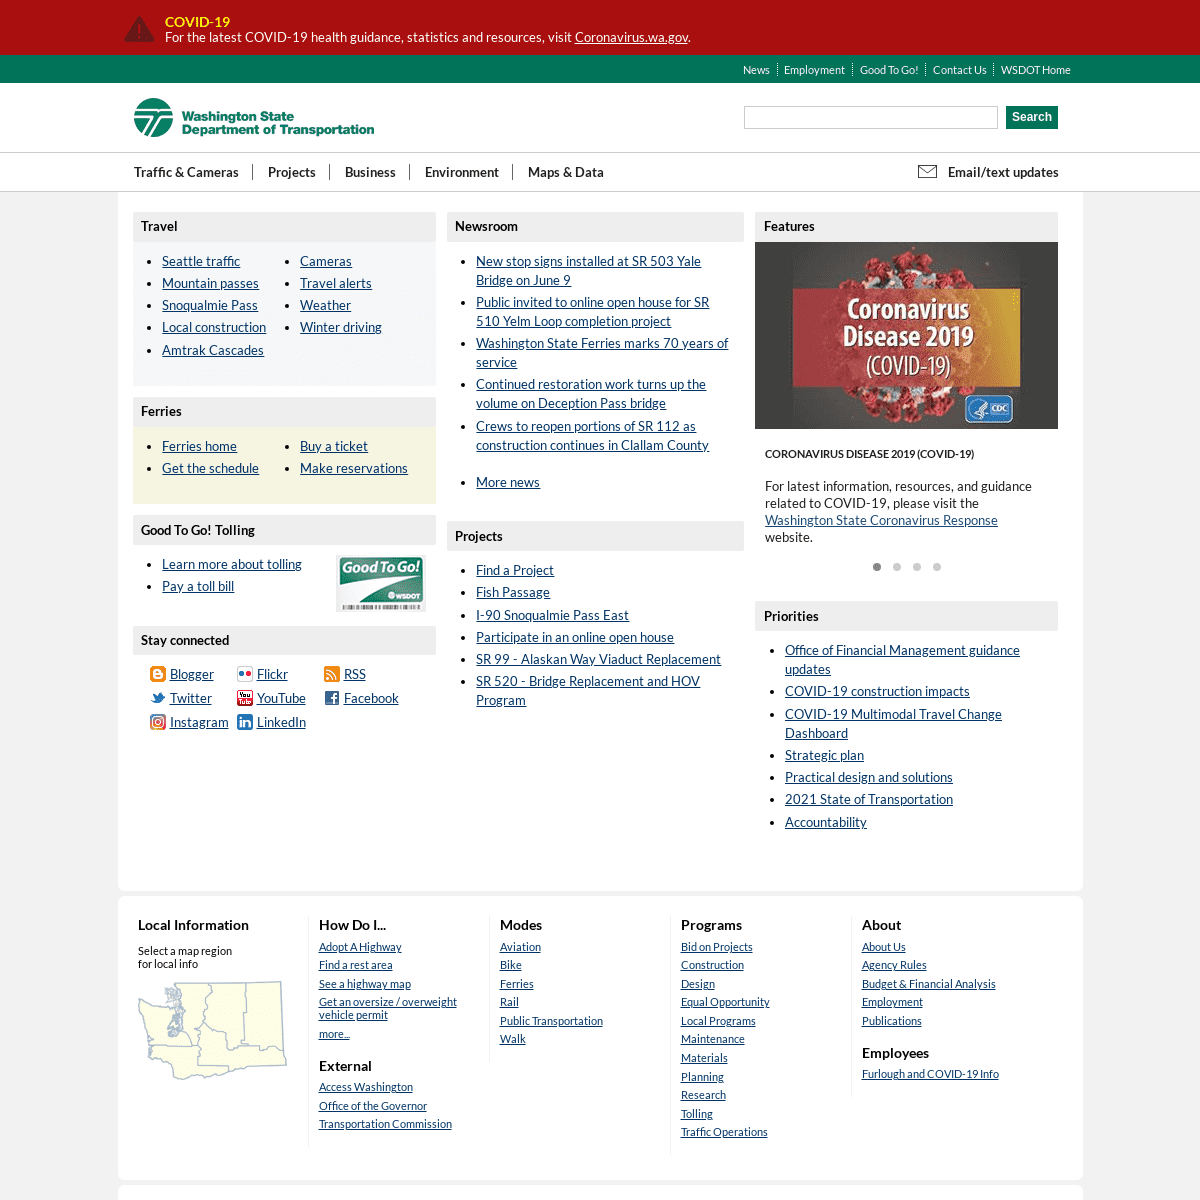 A complete backup of https://wsdot.com